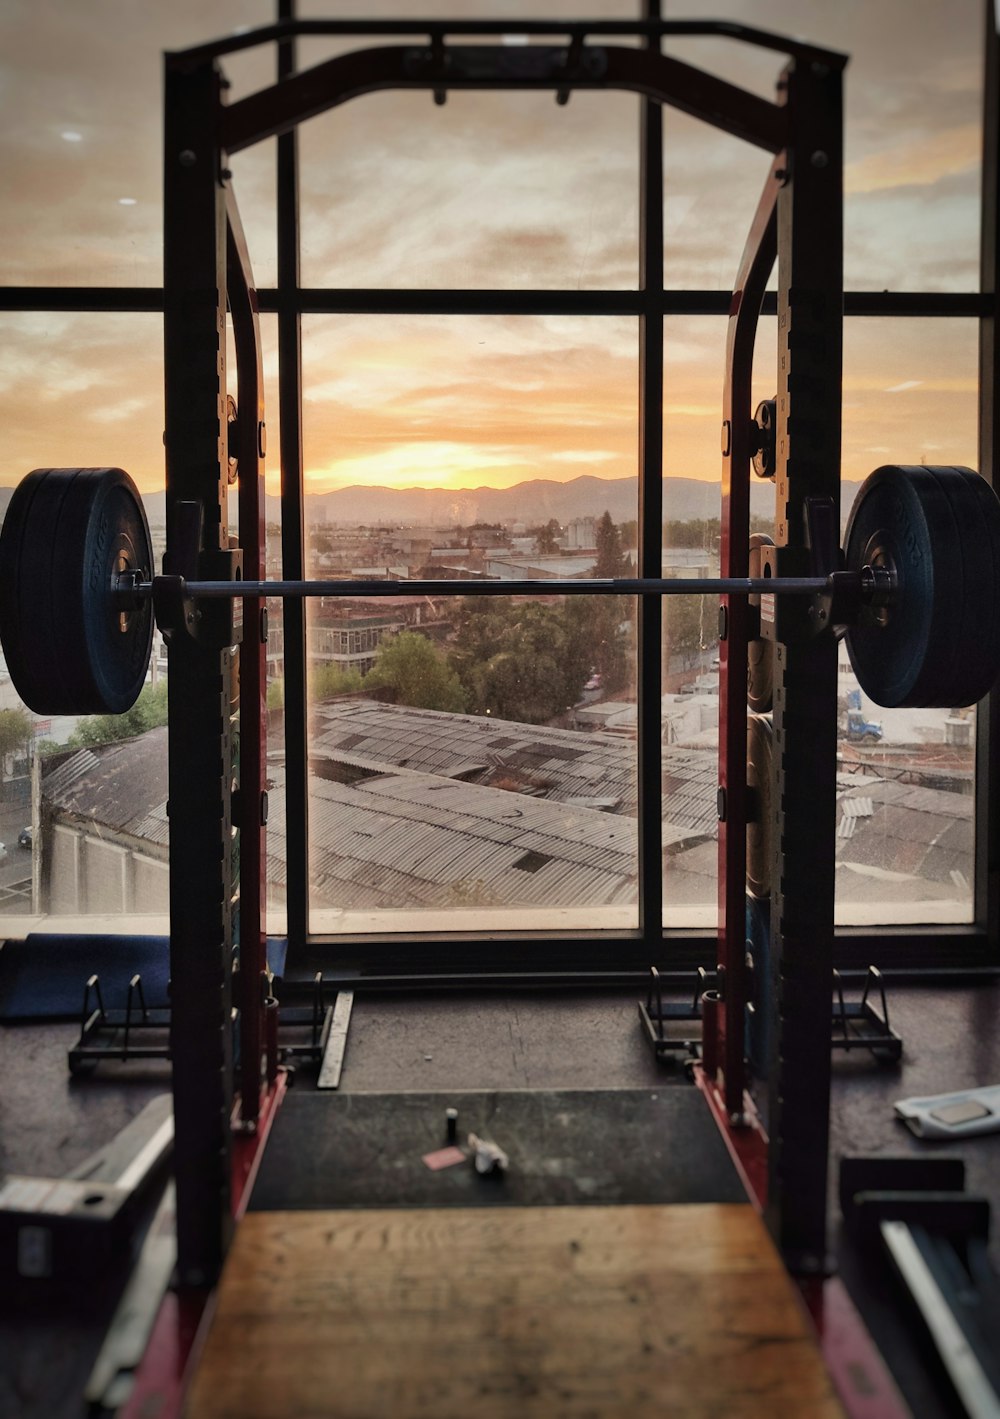 1000+ Gym Background Pictures | Download Free Images on Unsplash